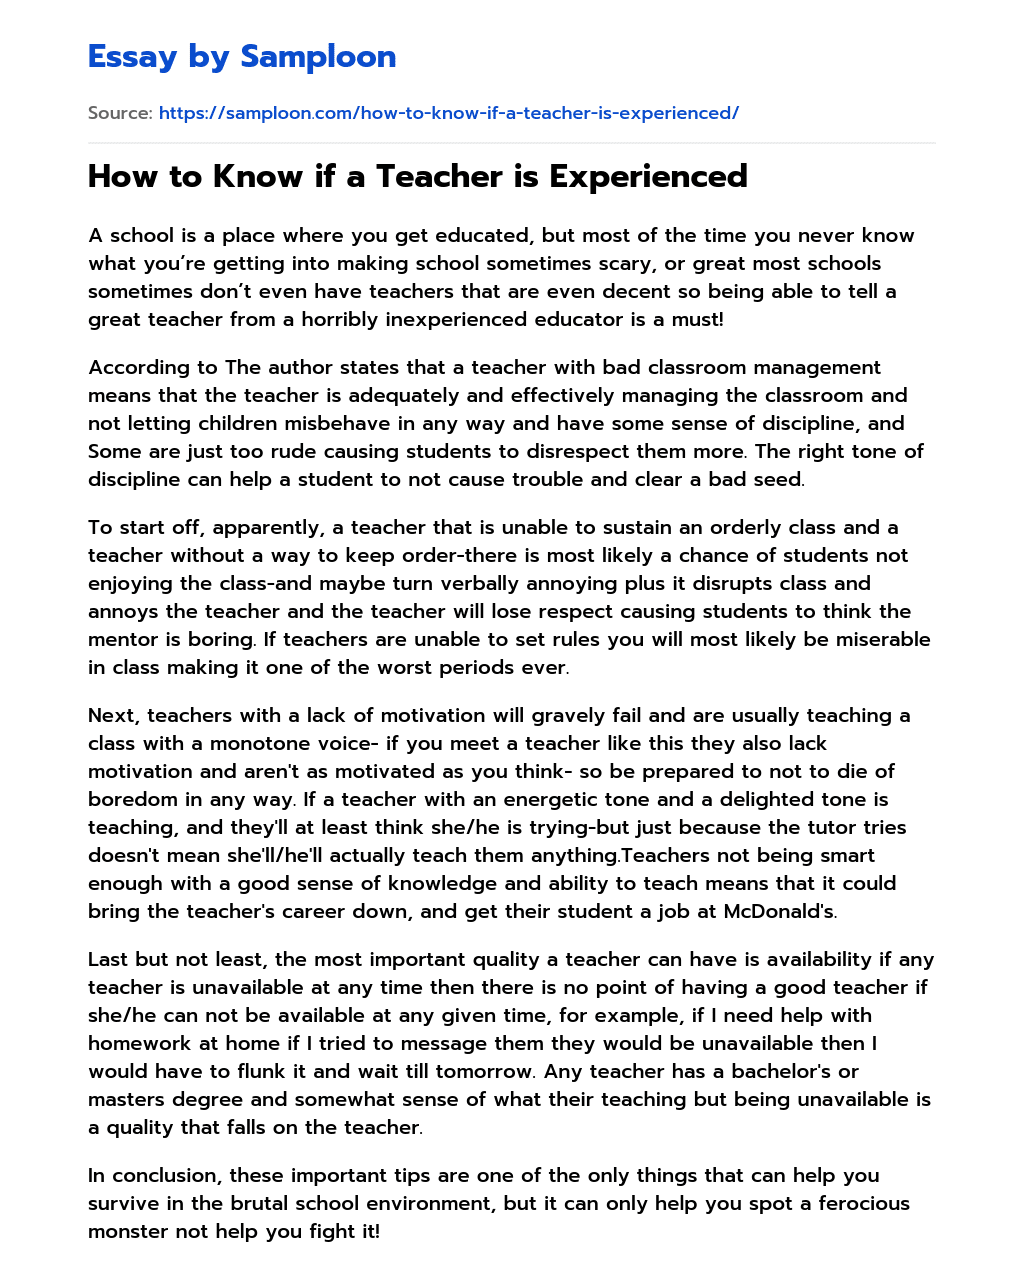 How to Know if a Teacher is Experienced essay